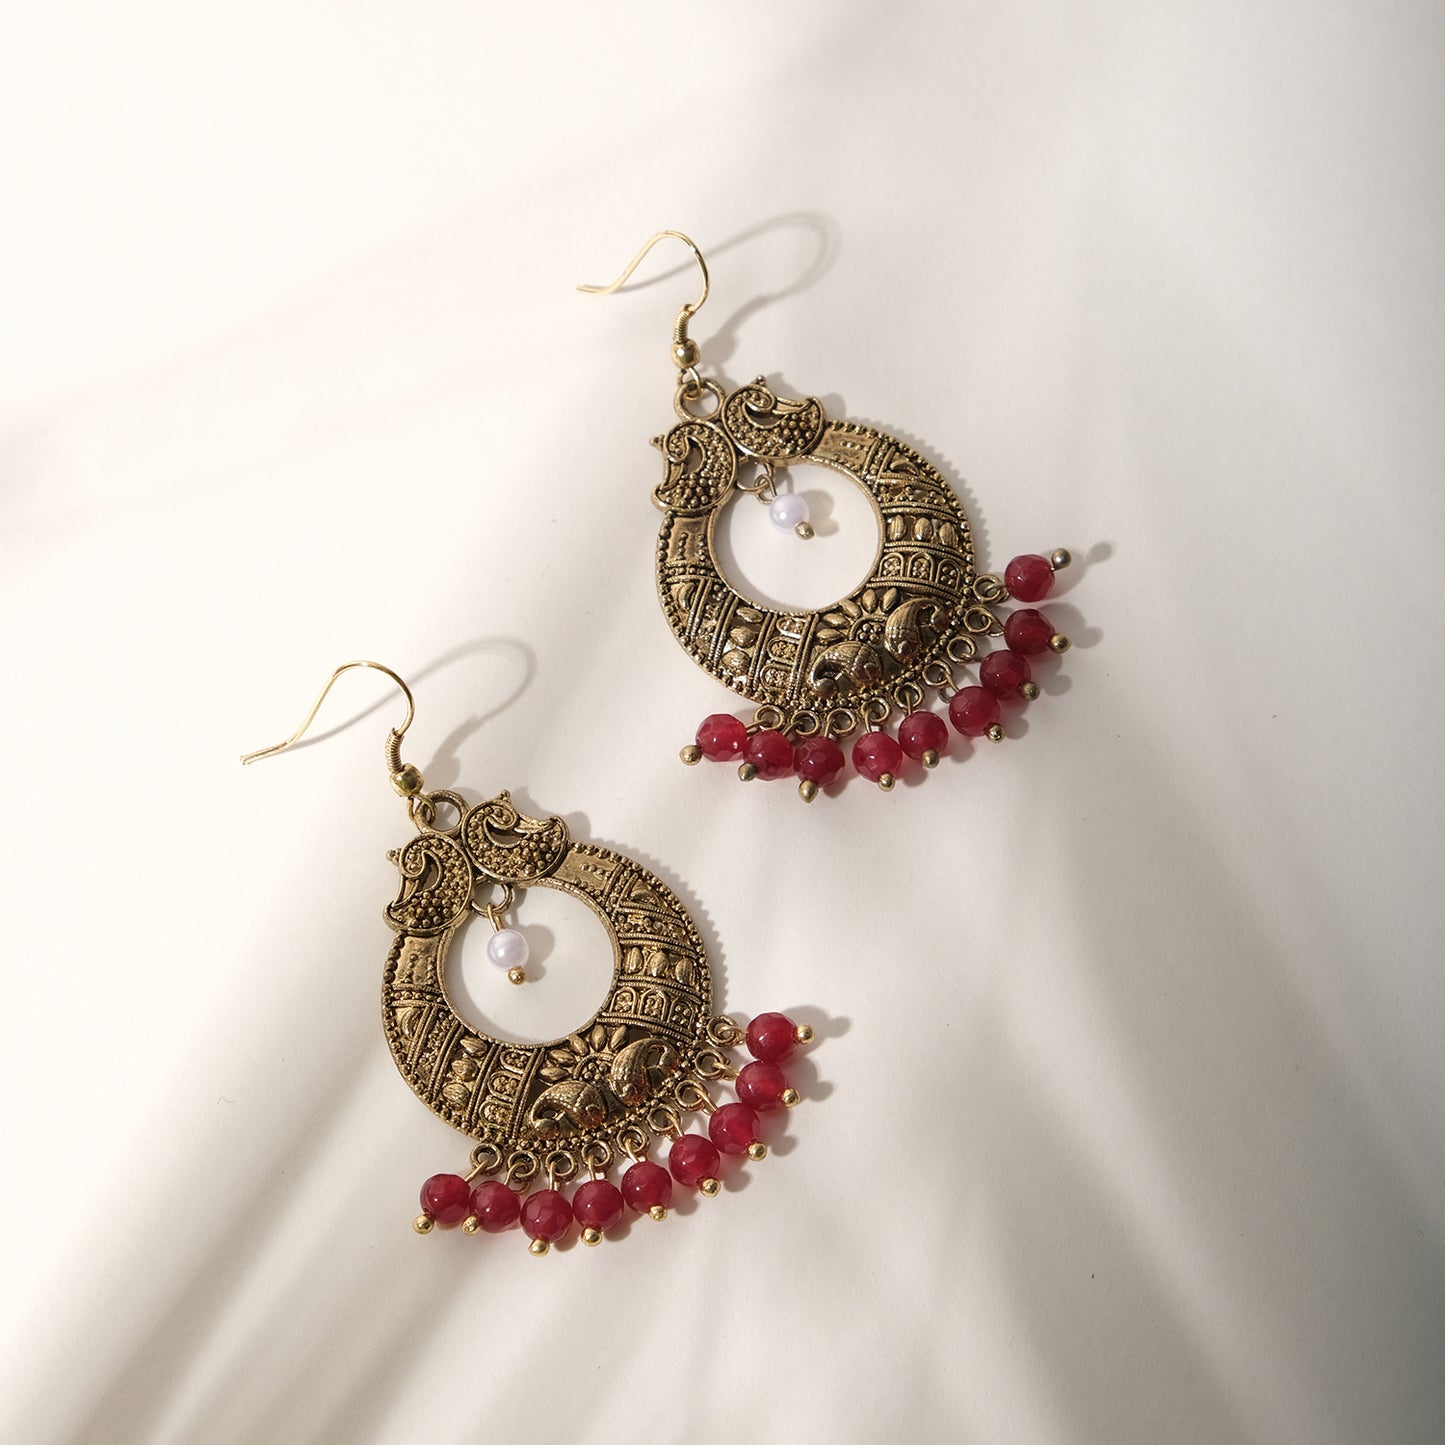 Antique Gold Carved Drop Earrings